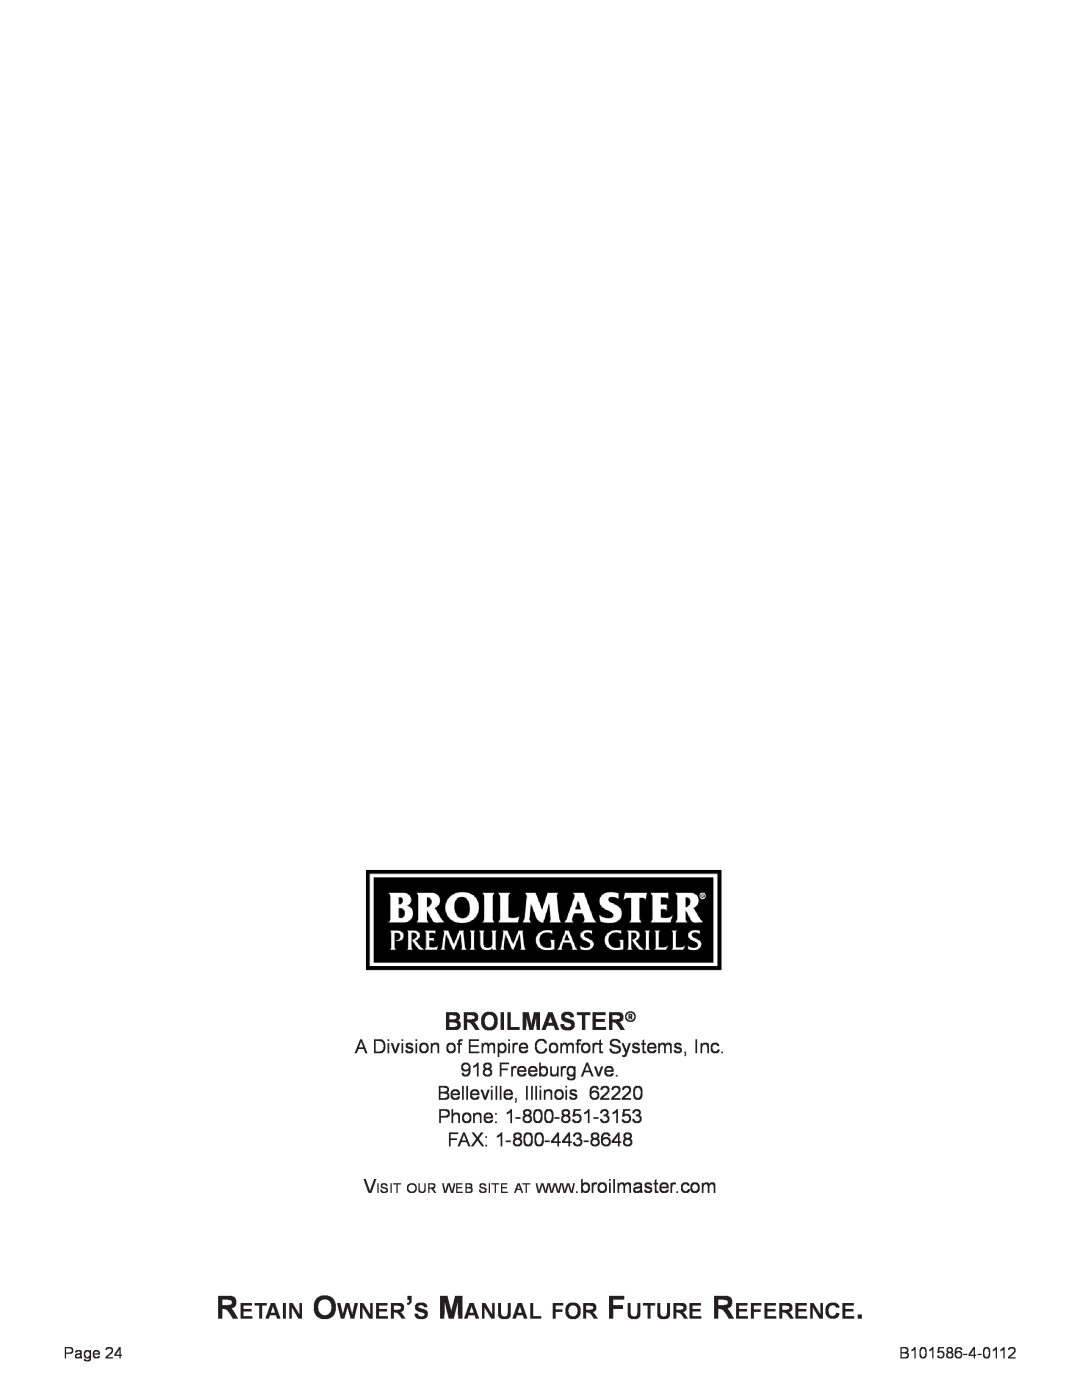 Broilmaster DCB1-2, SS26P-1, SS48G-1, PCB1-2, BL26P-1, BL48G-1, B101652 Broilmaster, Retain Owner’s Manual for Future Reference 